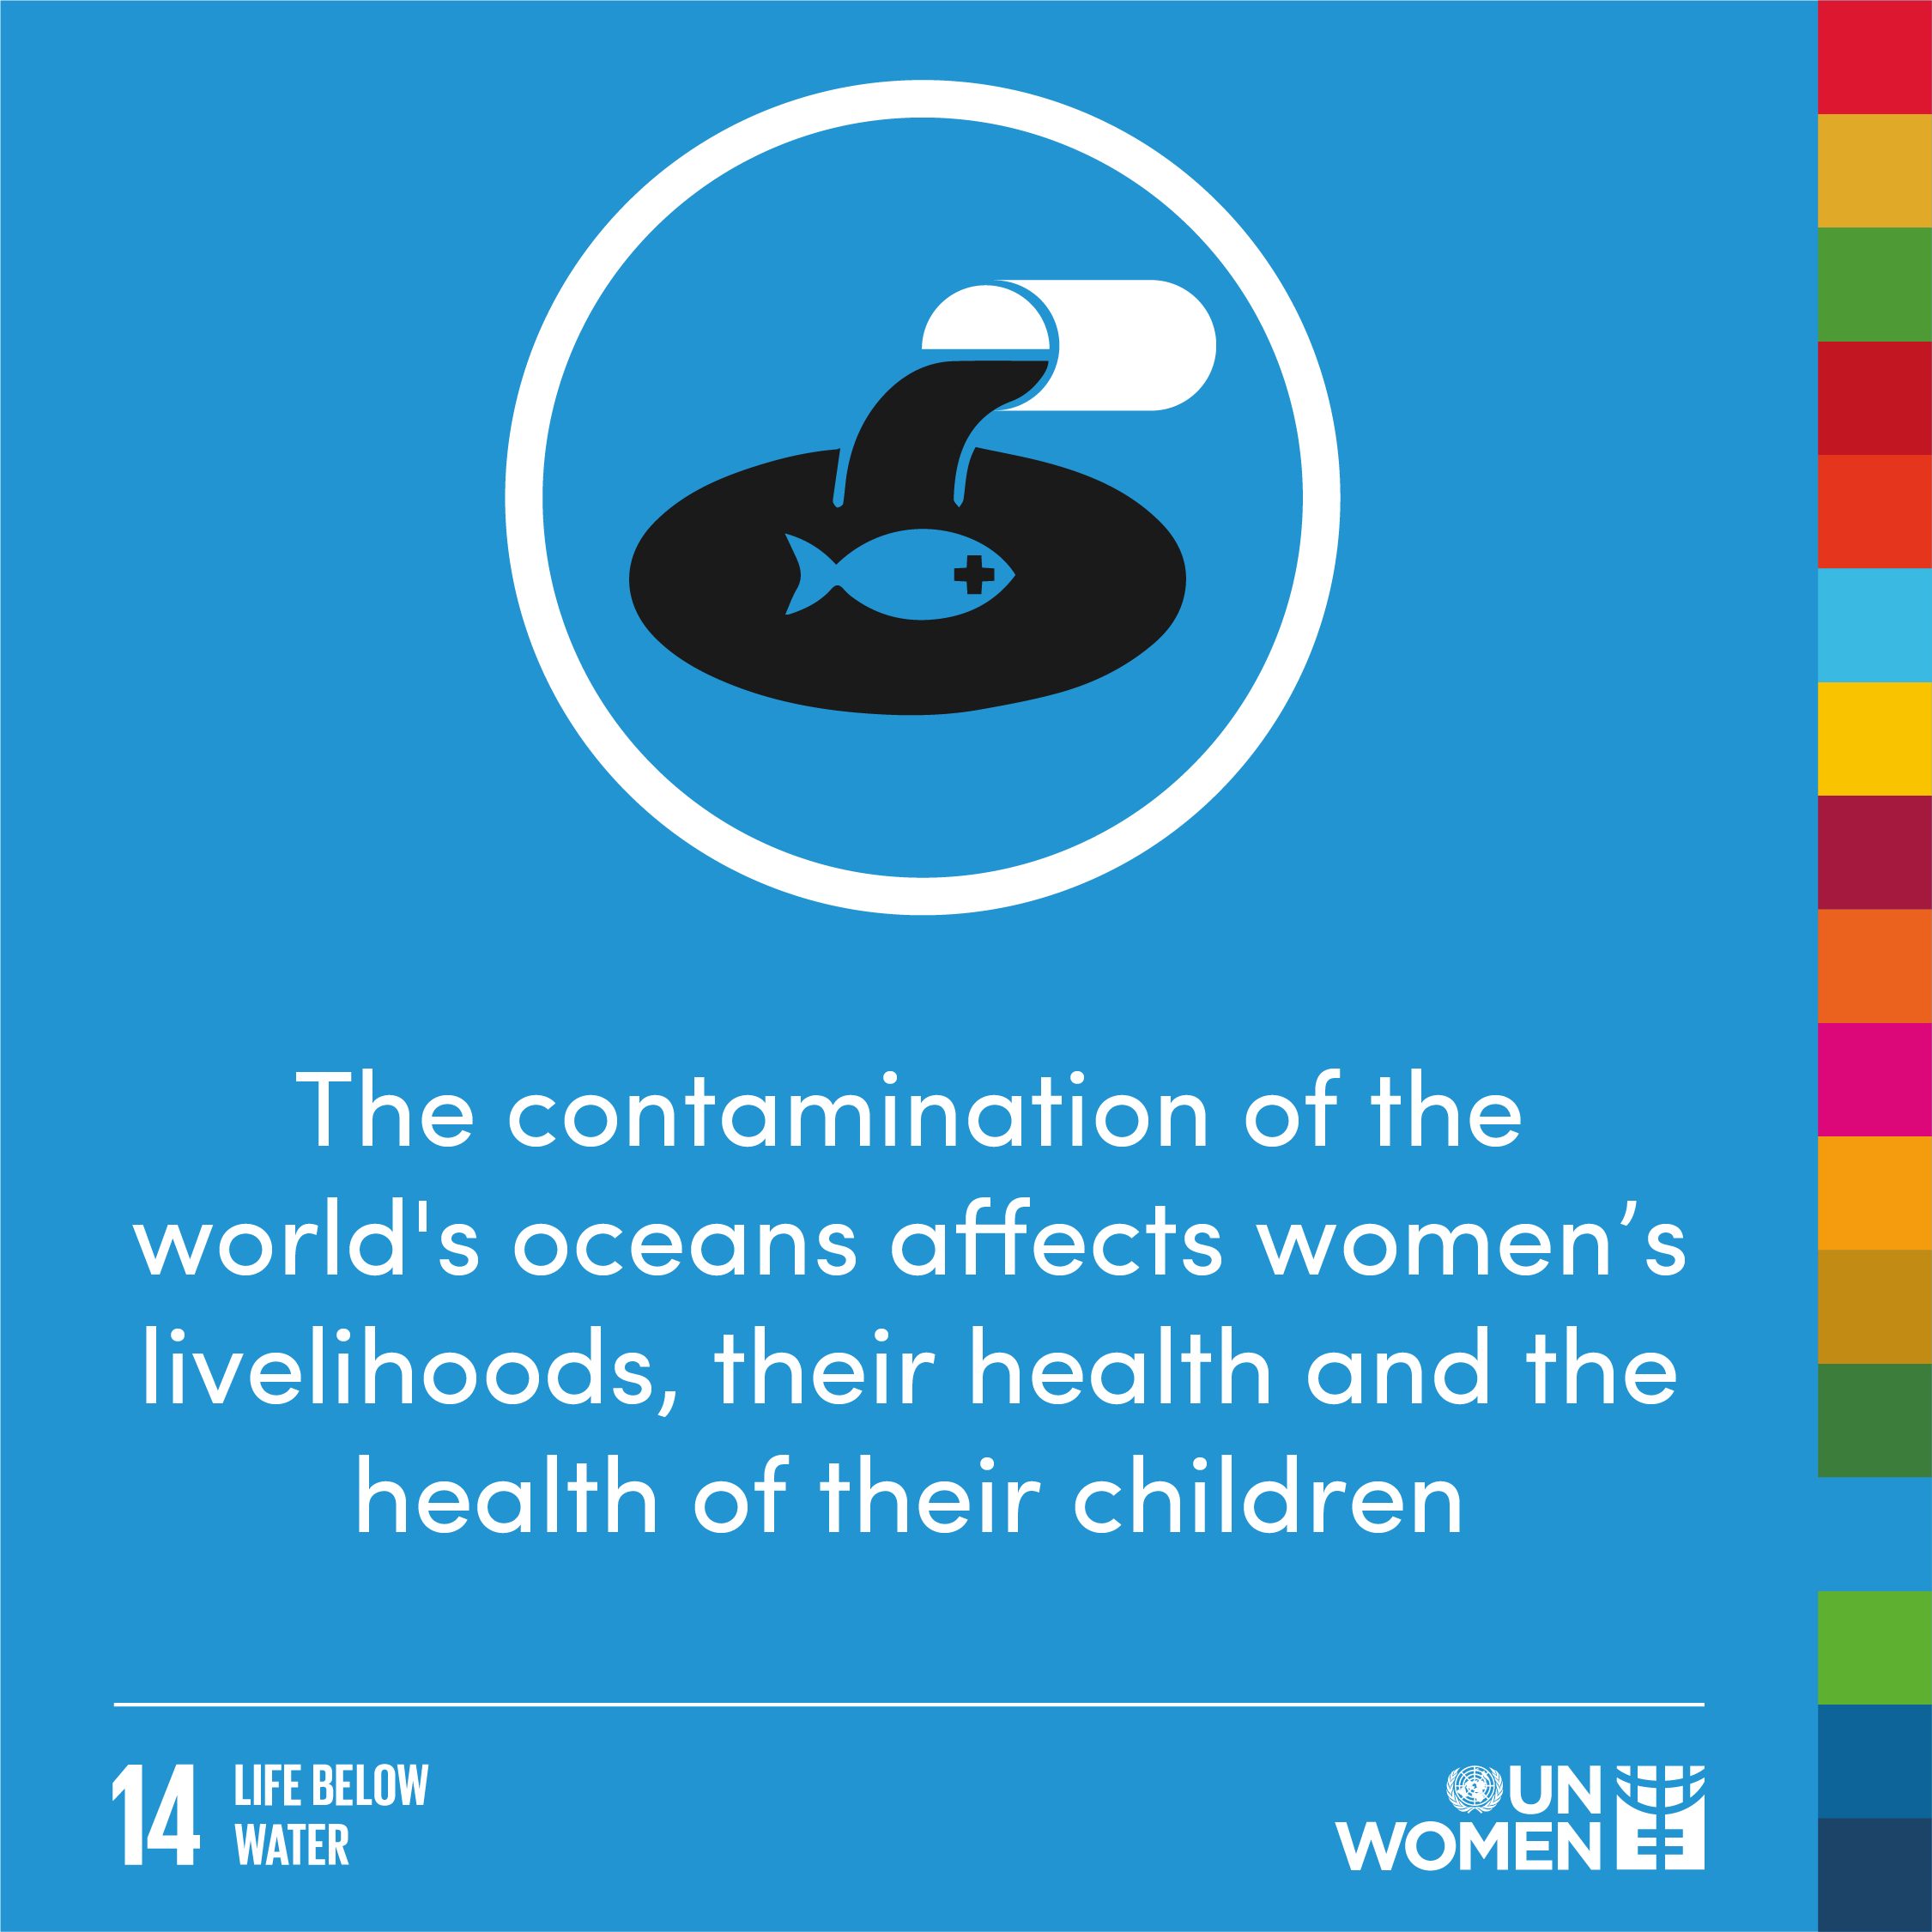 The contamination of the world's oceans affects women's livelihoods, their health and the health of their children.